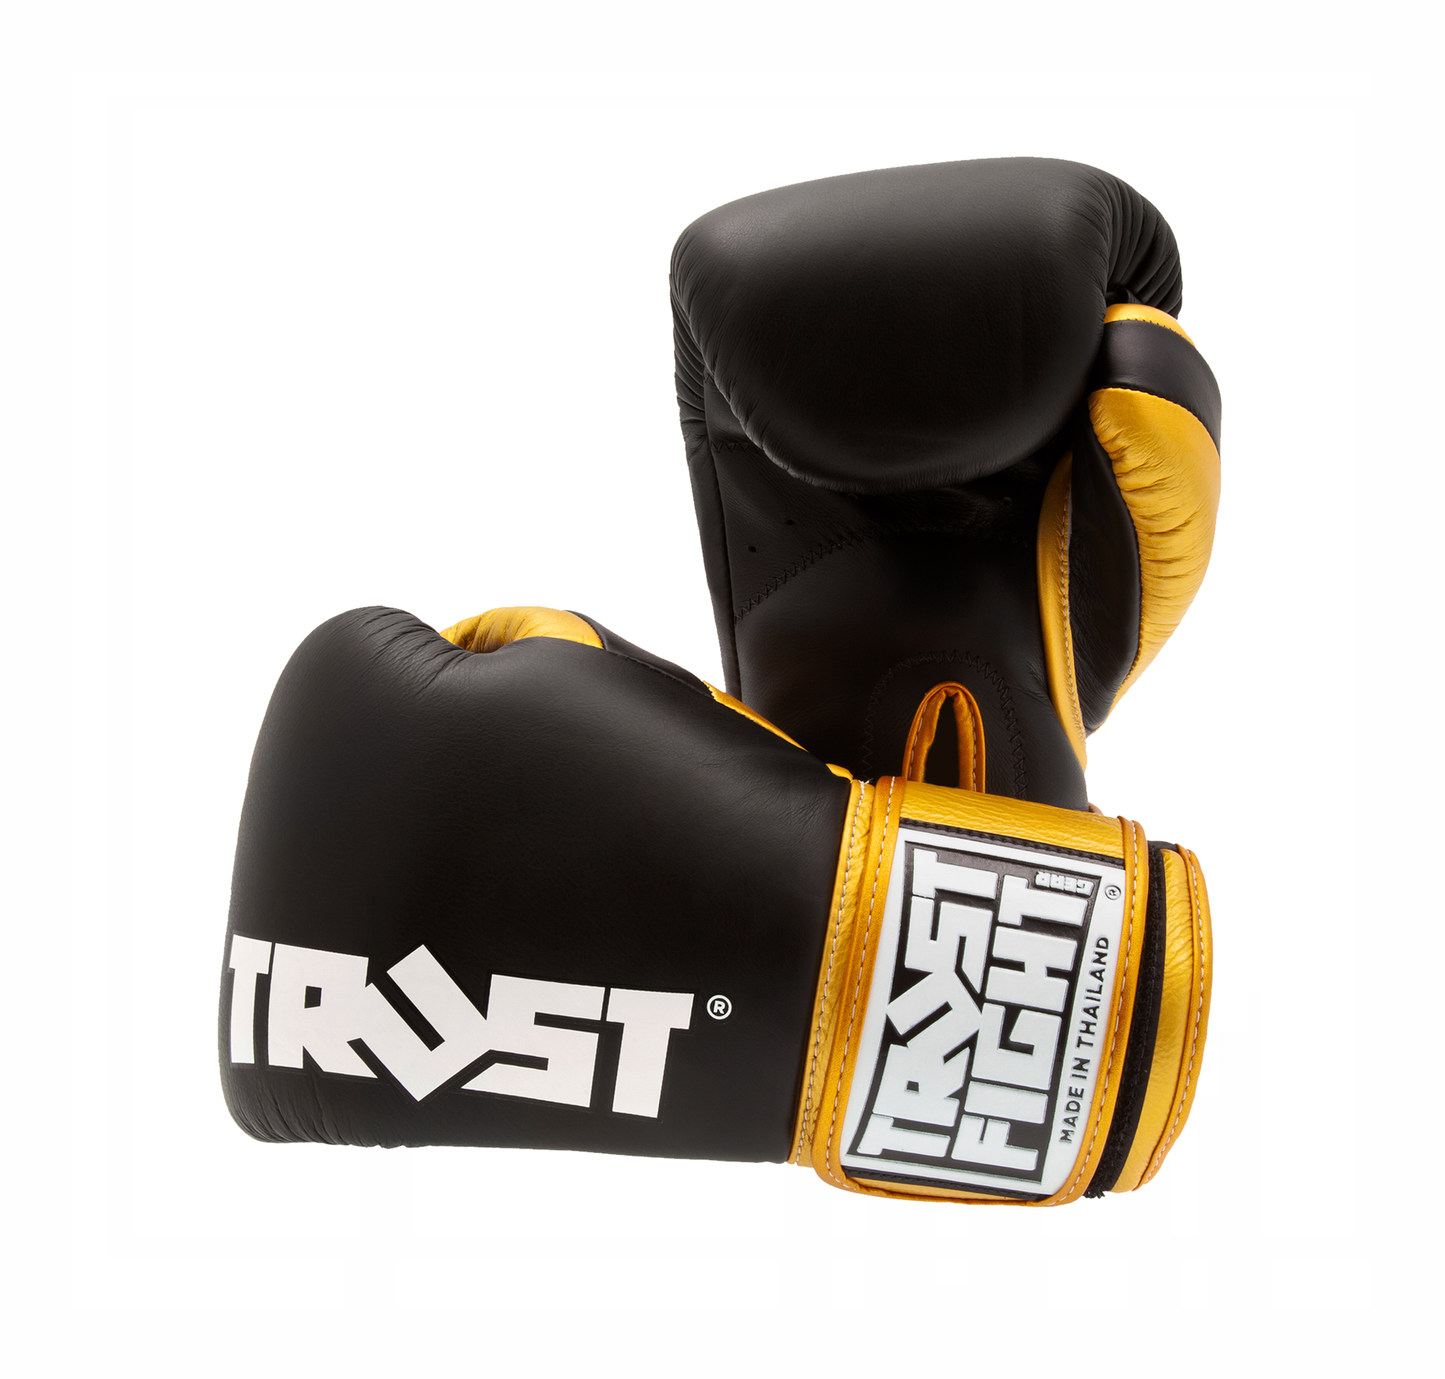 TRUST Boxing Gloves Squire Black/Gold